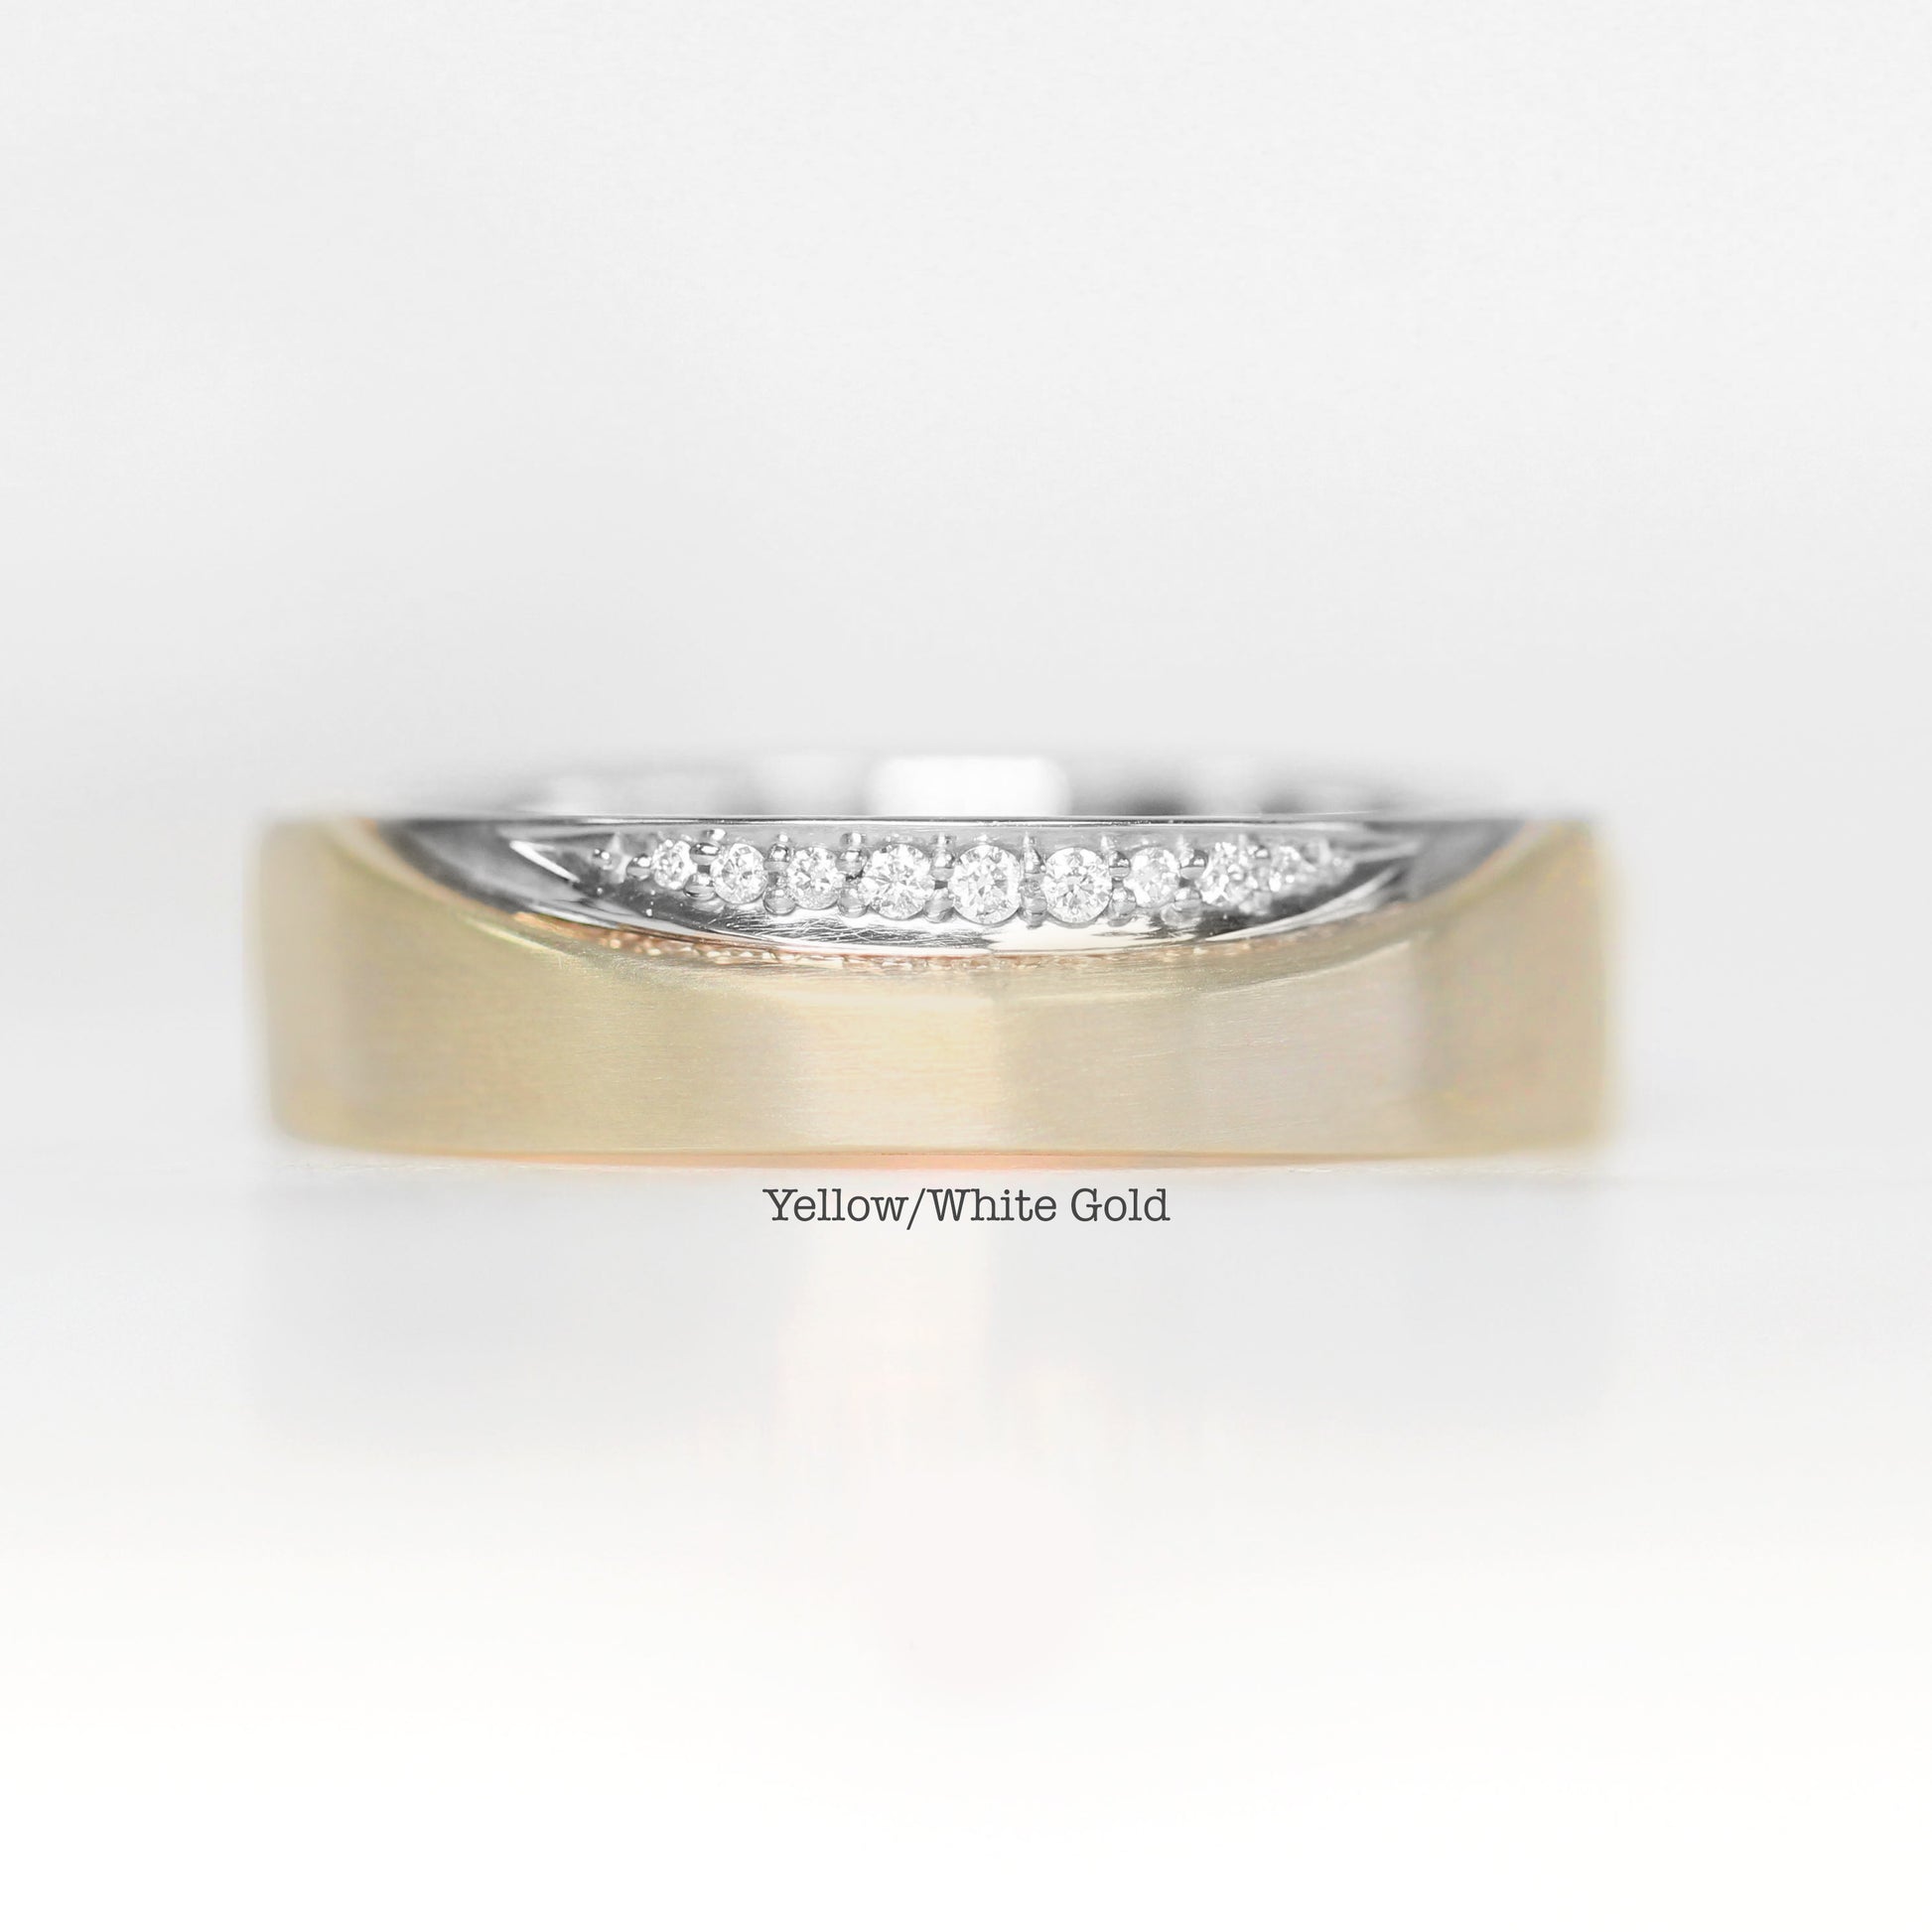 Caleb ring - Two or one tone - Diamond unisex wedding band -  Made to Order - Midwinter Co. Alternative Bridal Rings and Modern Fine Jewelry